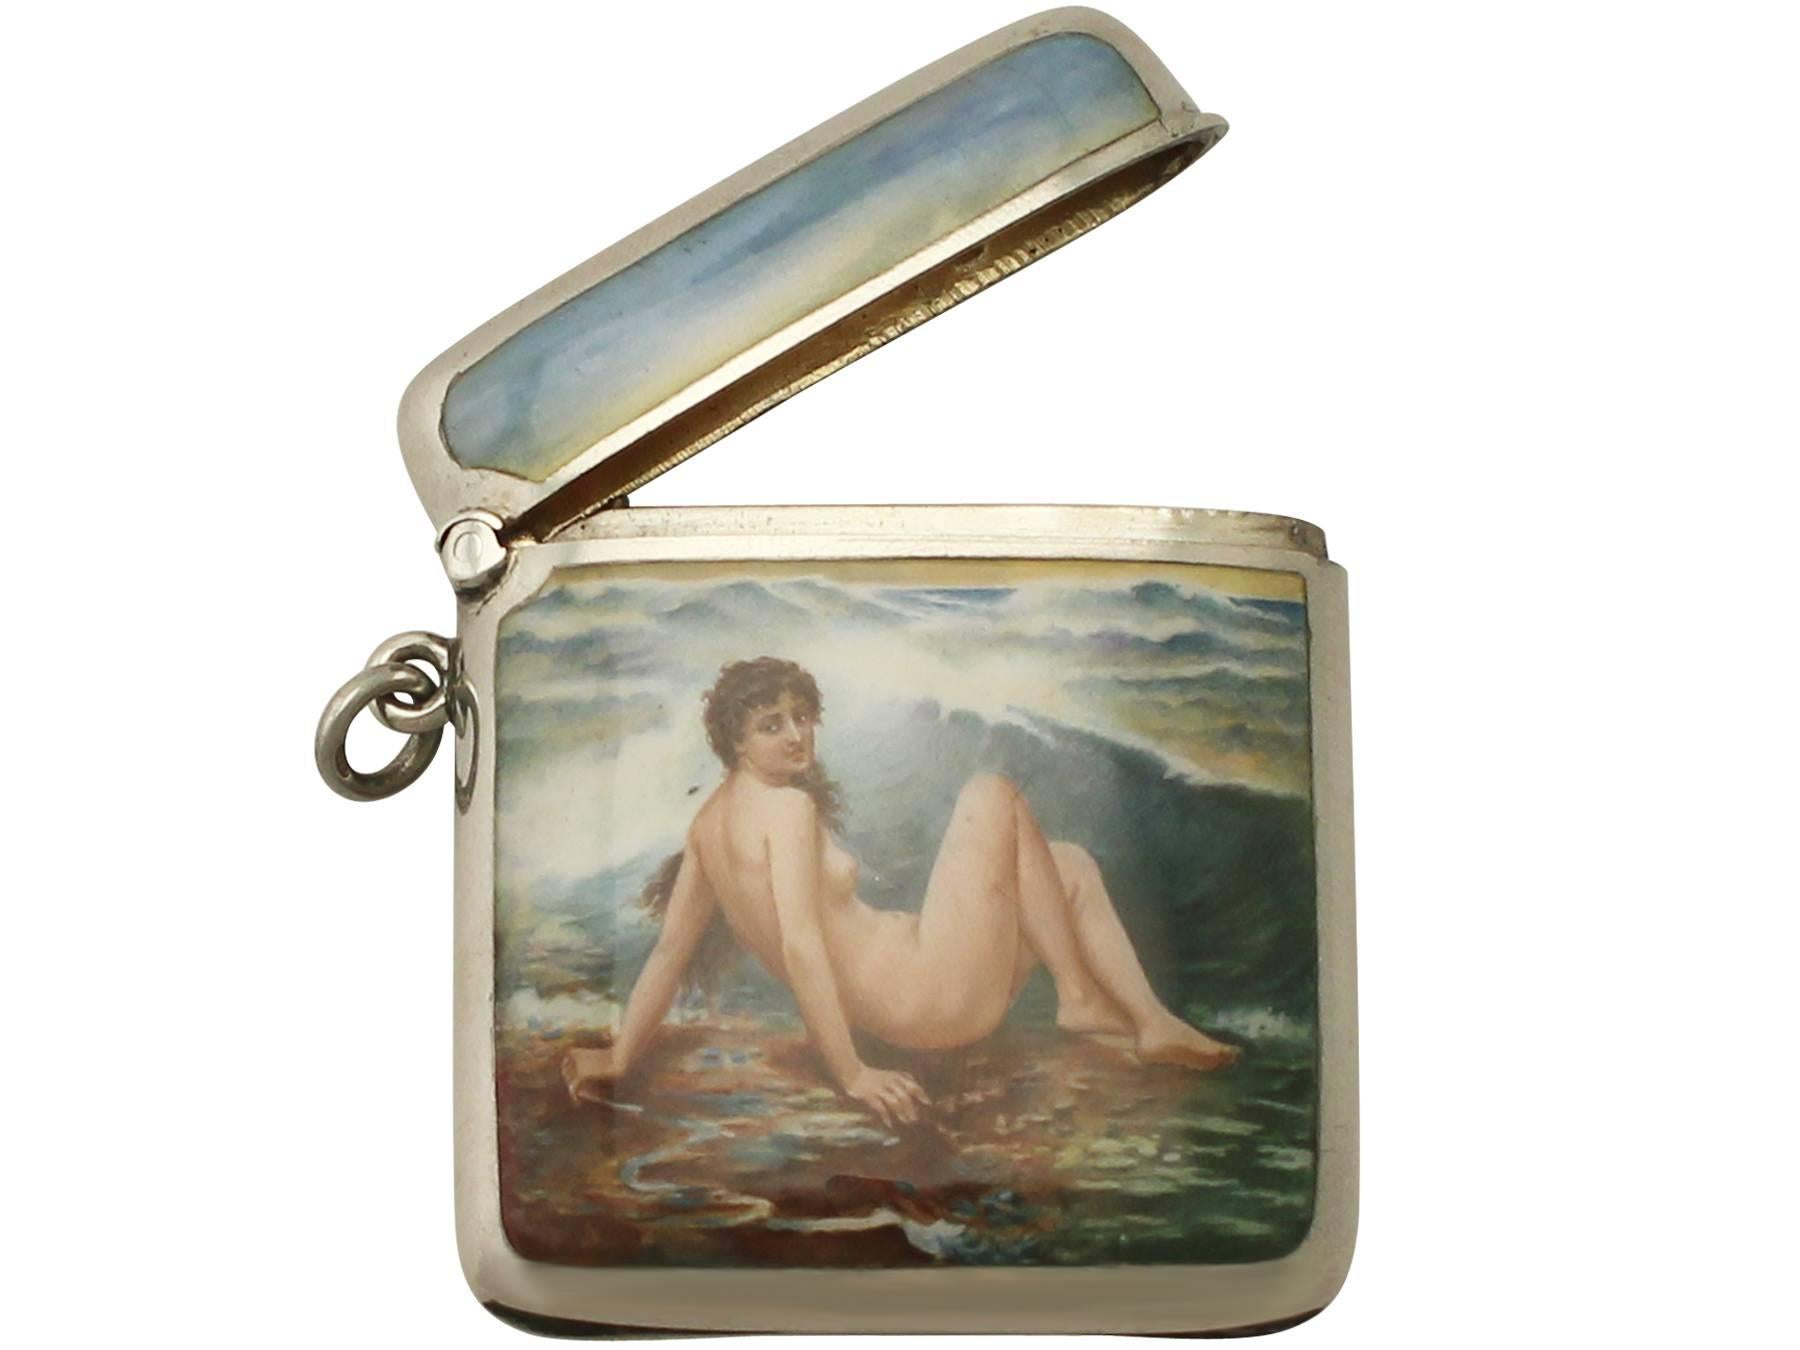 An exceptional, fine and impressive antique Edwardian English sterling silver and erotica enamel vesta case; an addition to our range of collectable silver cases.

This fine antique sterling silver vesta case has a plain rectangular rounded